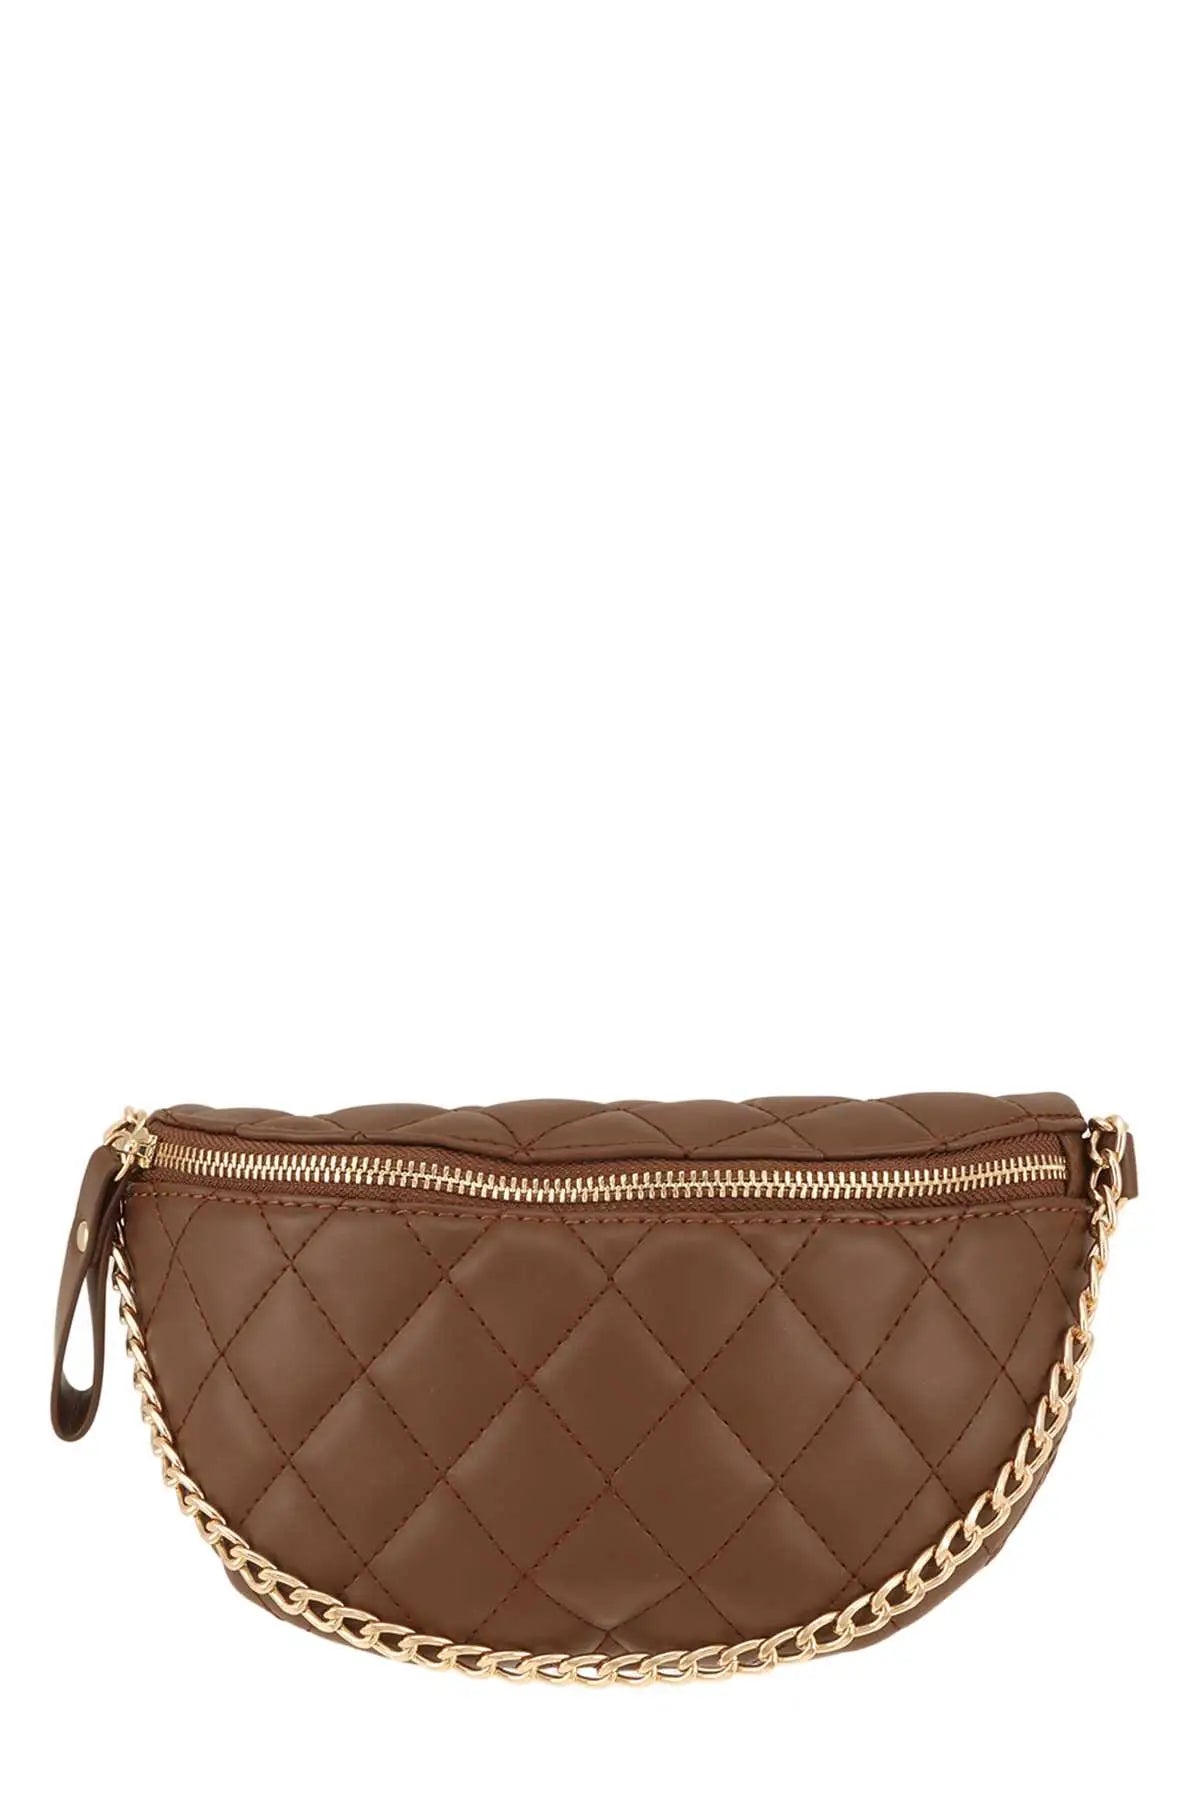 QUILTED CROSSBODY/BROWN